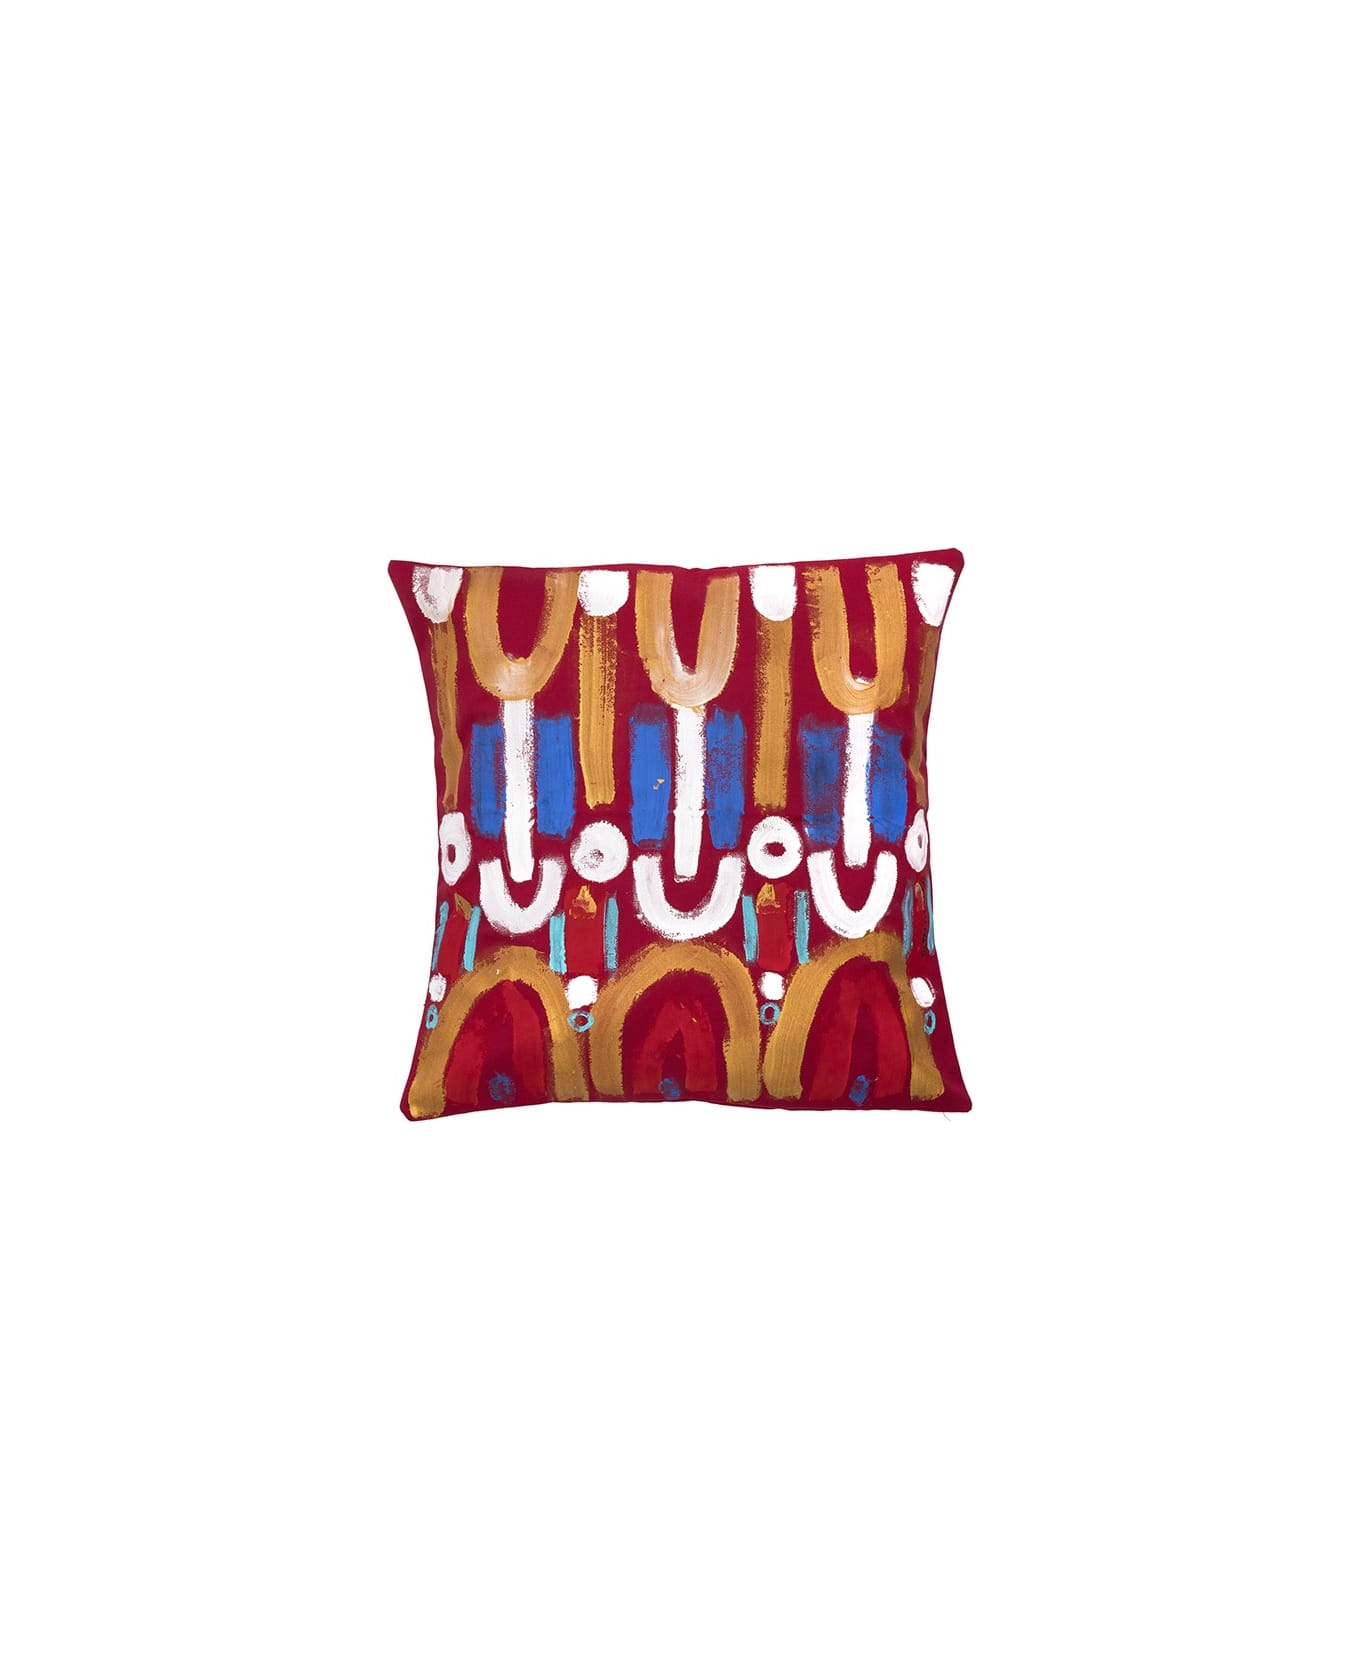 Le Botteghe su Gologone Acrylic Hand Painted Outdoor Cushion 60x60 cm - Dark Red